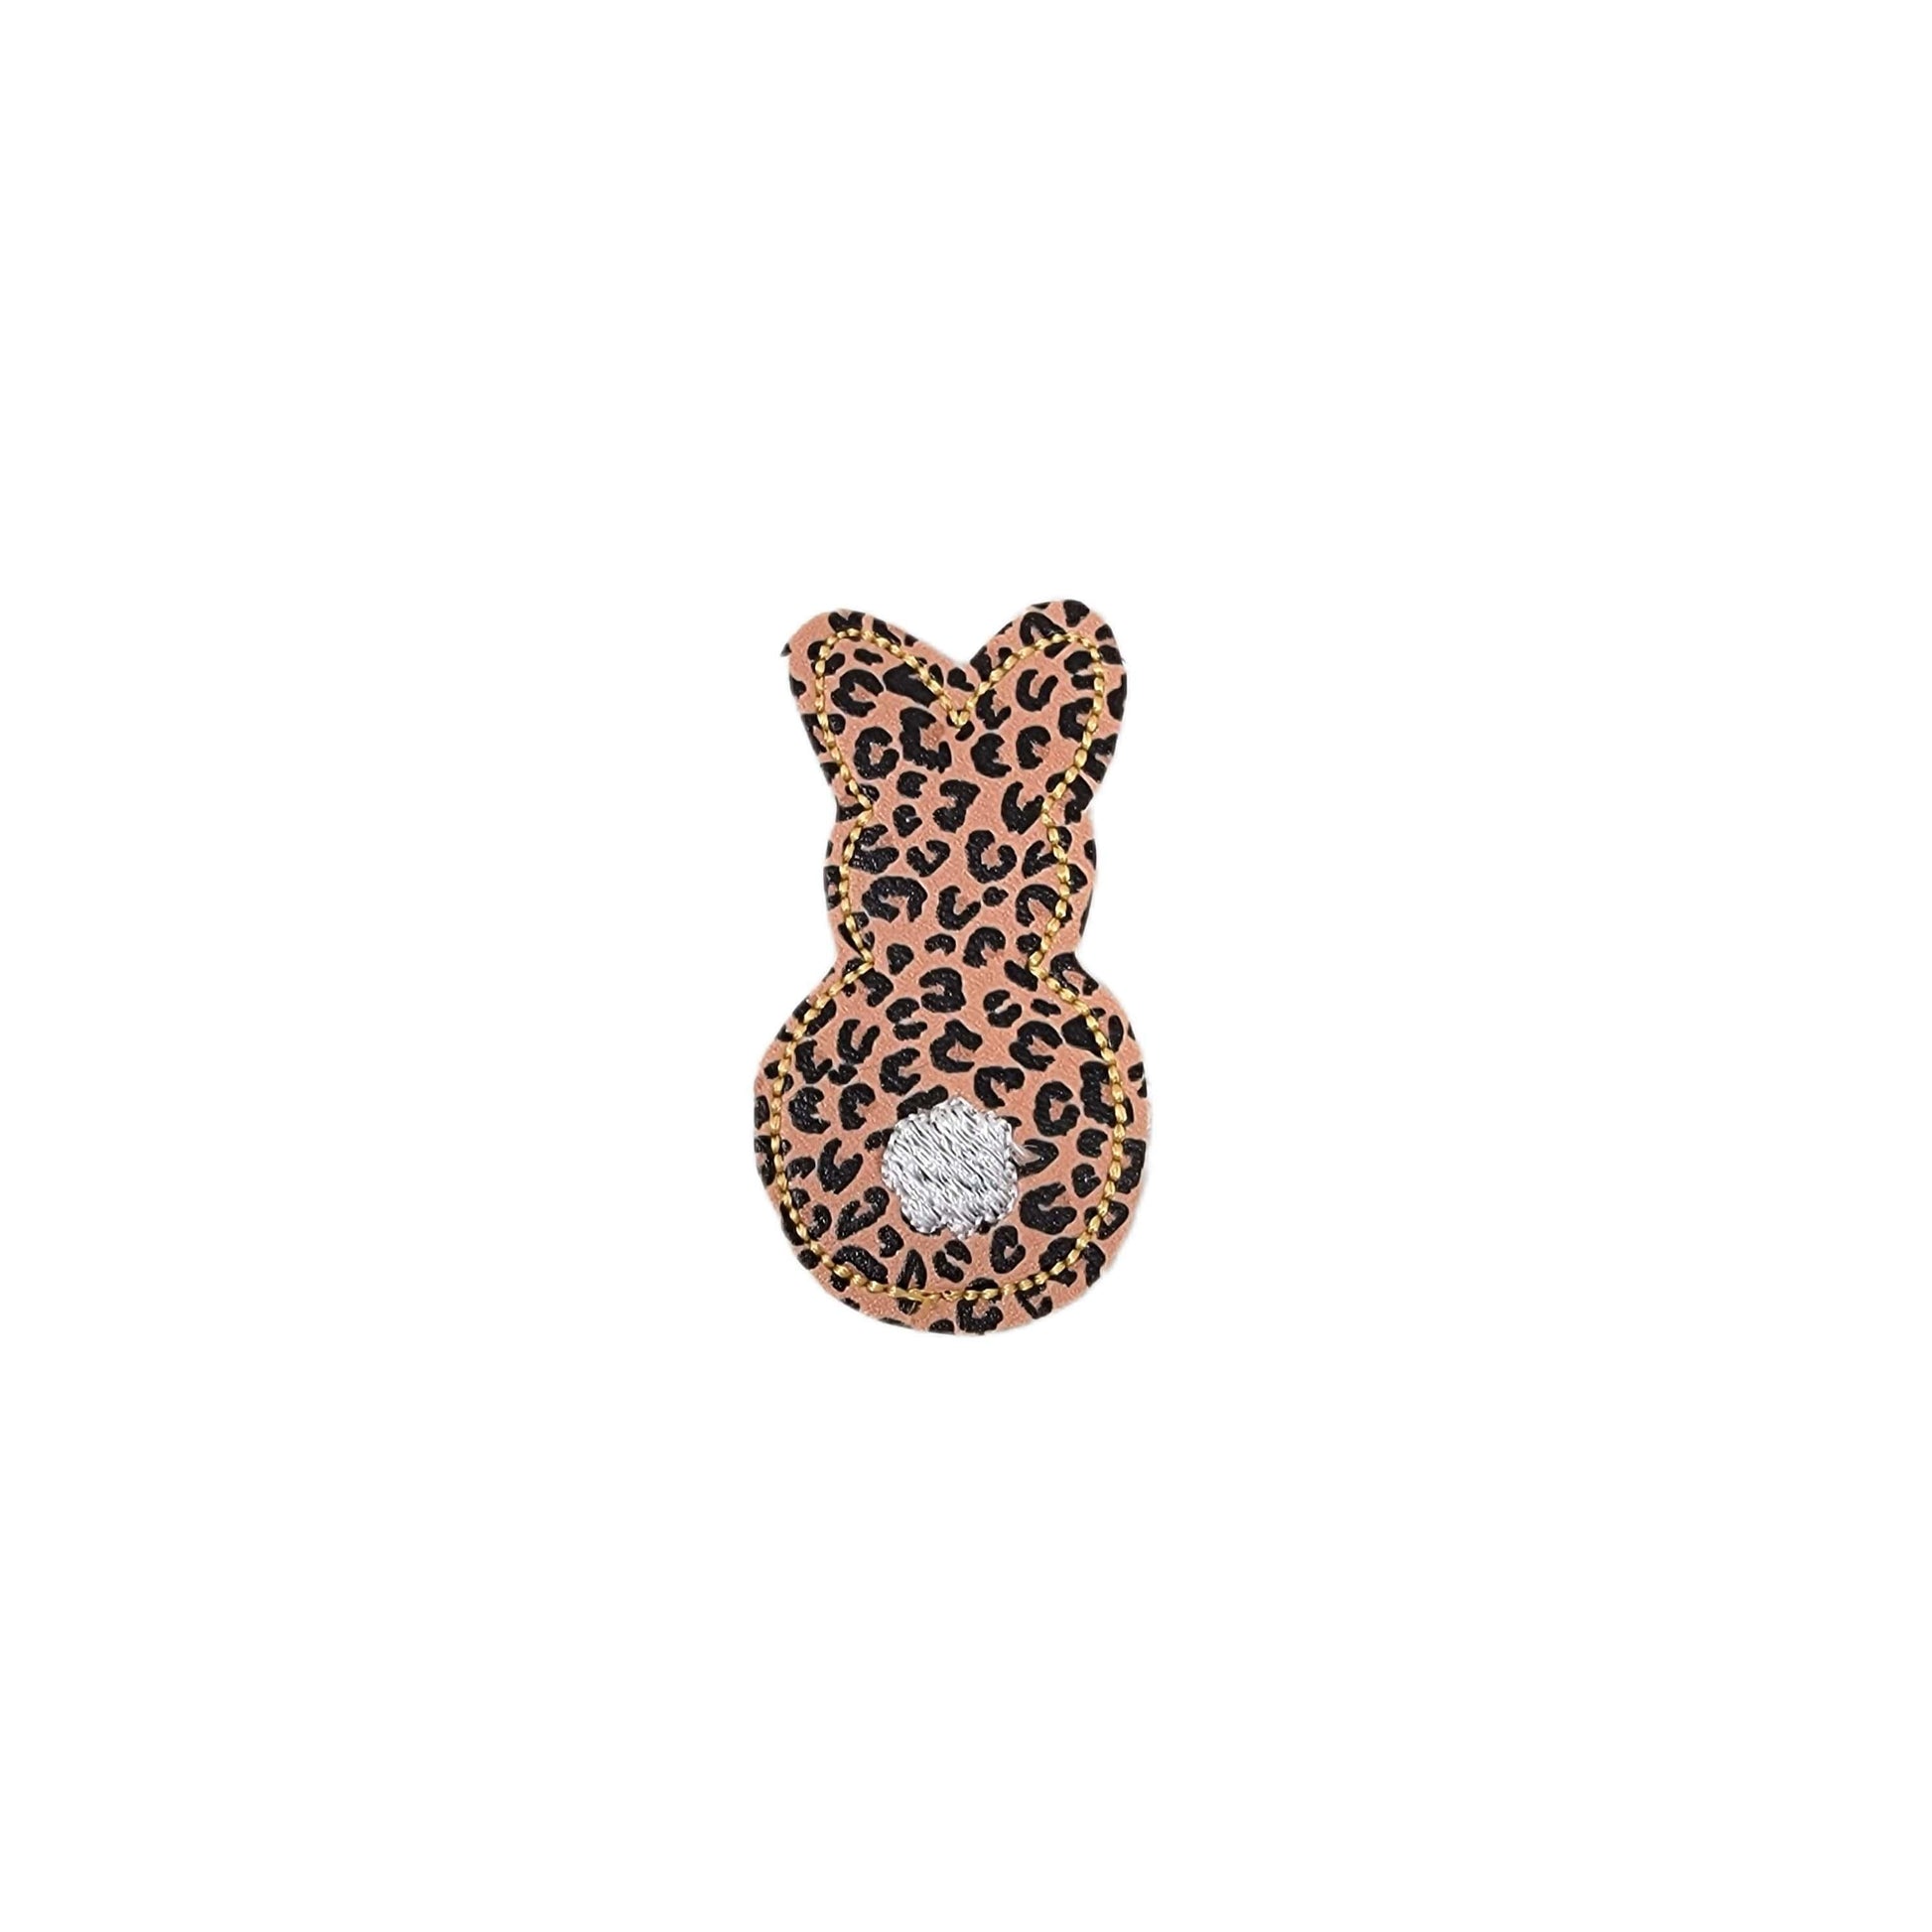 Leopard Bunny Clip 2.5" - Waterfall Wishes